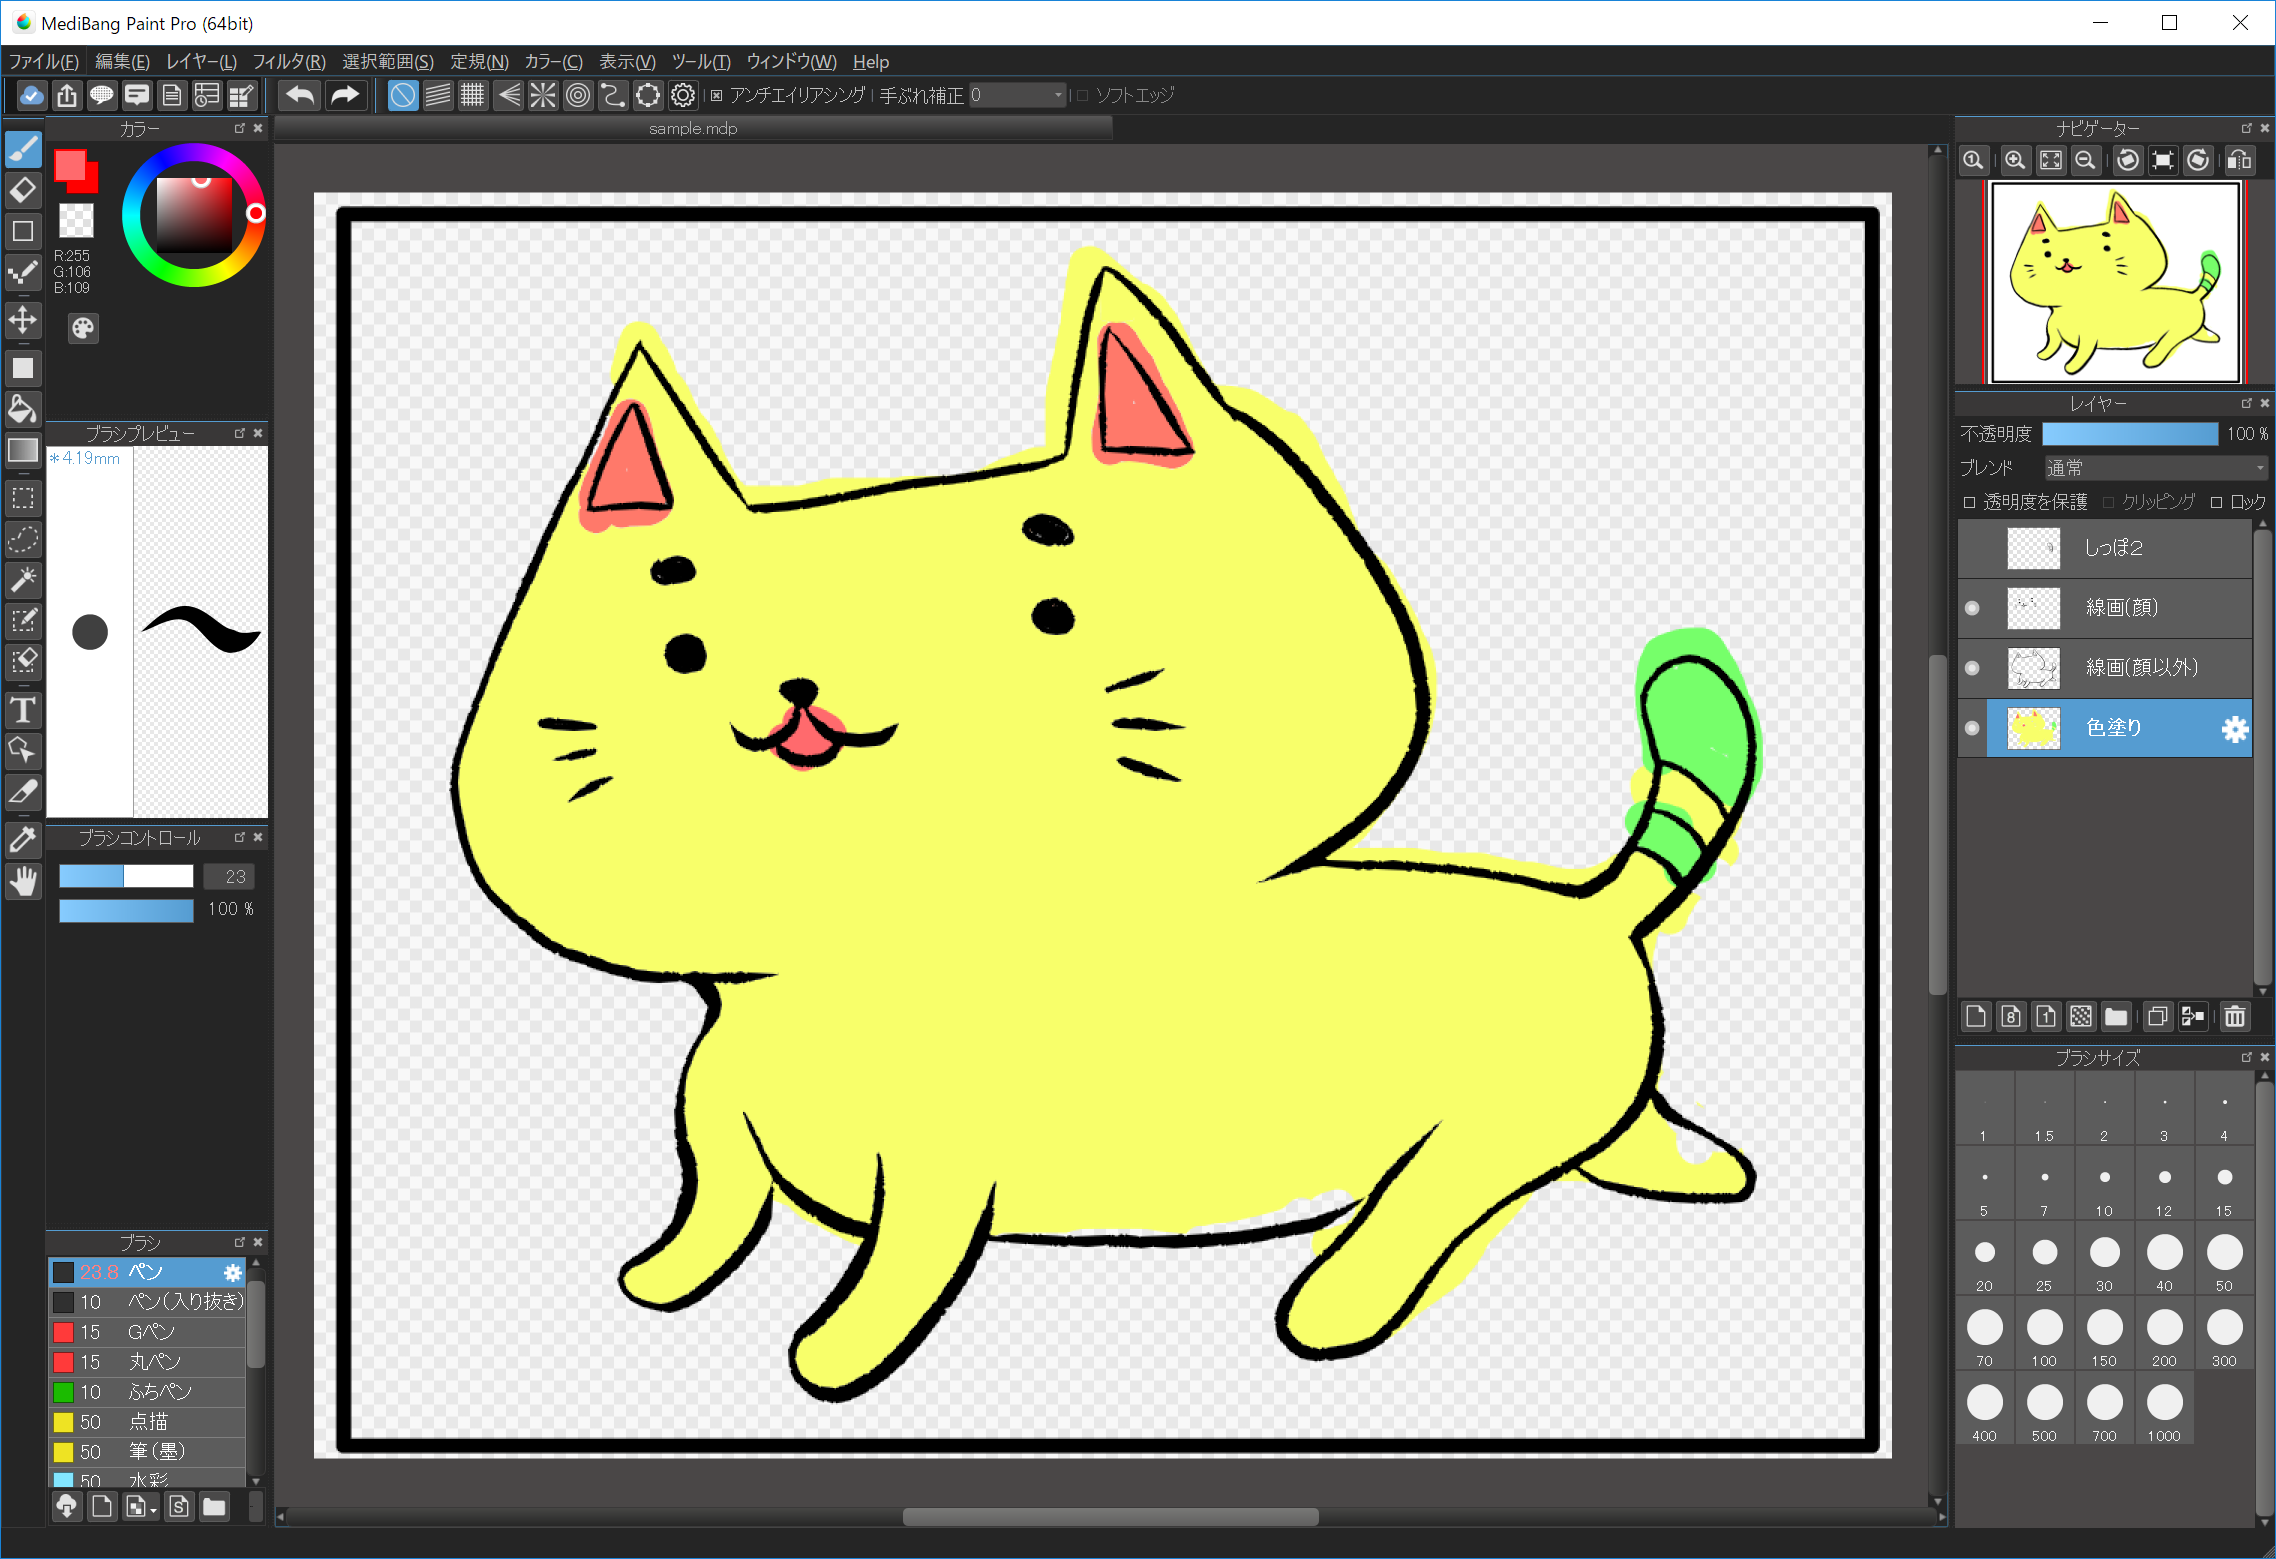 I tried painting the cat with yellow